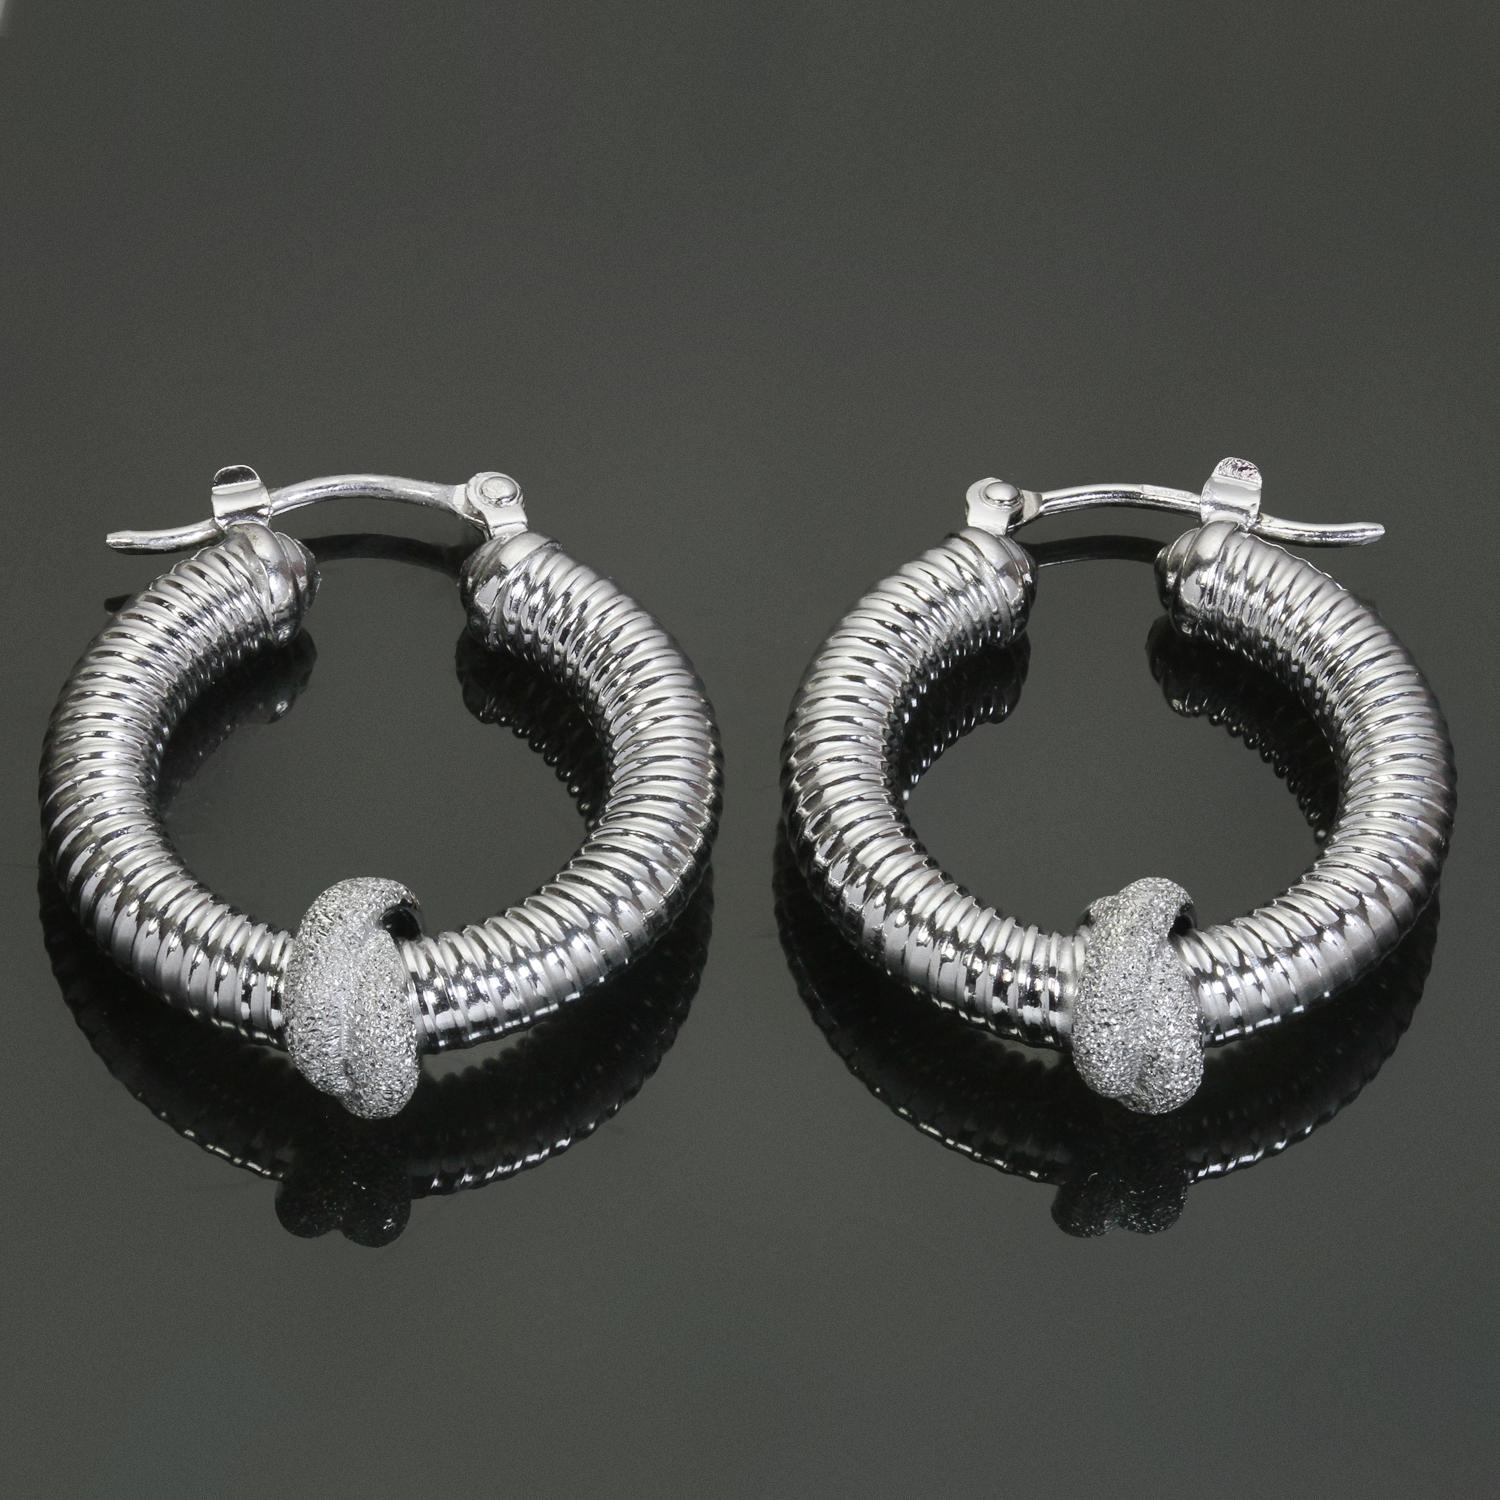 These classic estate ridged hoop earrings are crafted in 14k white gold and feature a textured gold accent meant to look like a pave-setting of diamonds. Made in United States circa 1980s. Made in United States circa 1980s. Measurements: 0.15